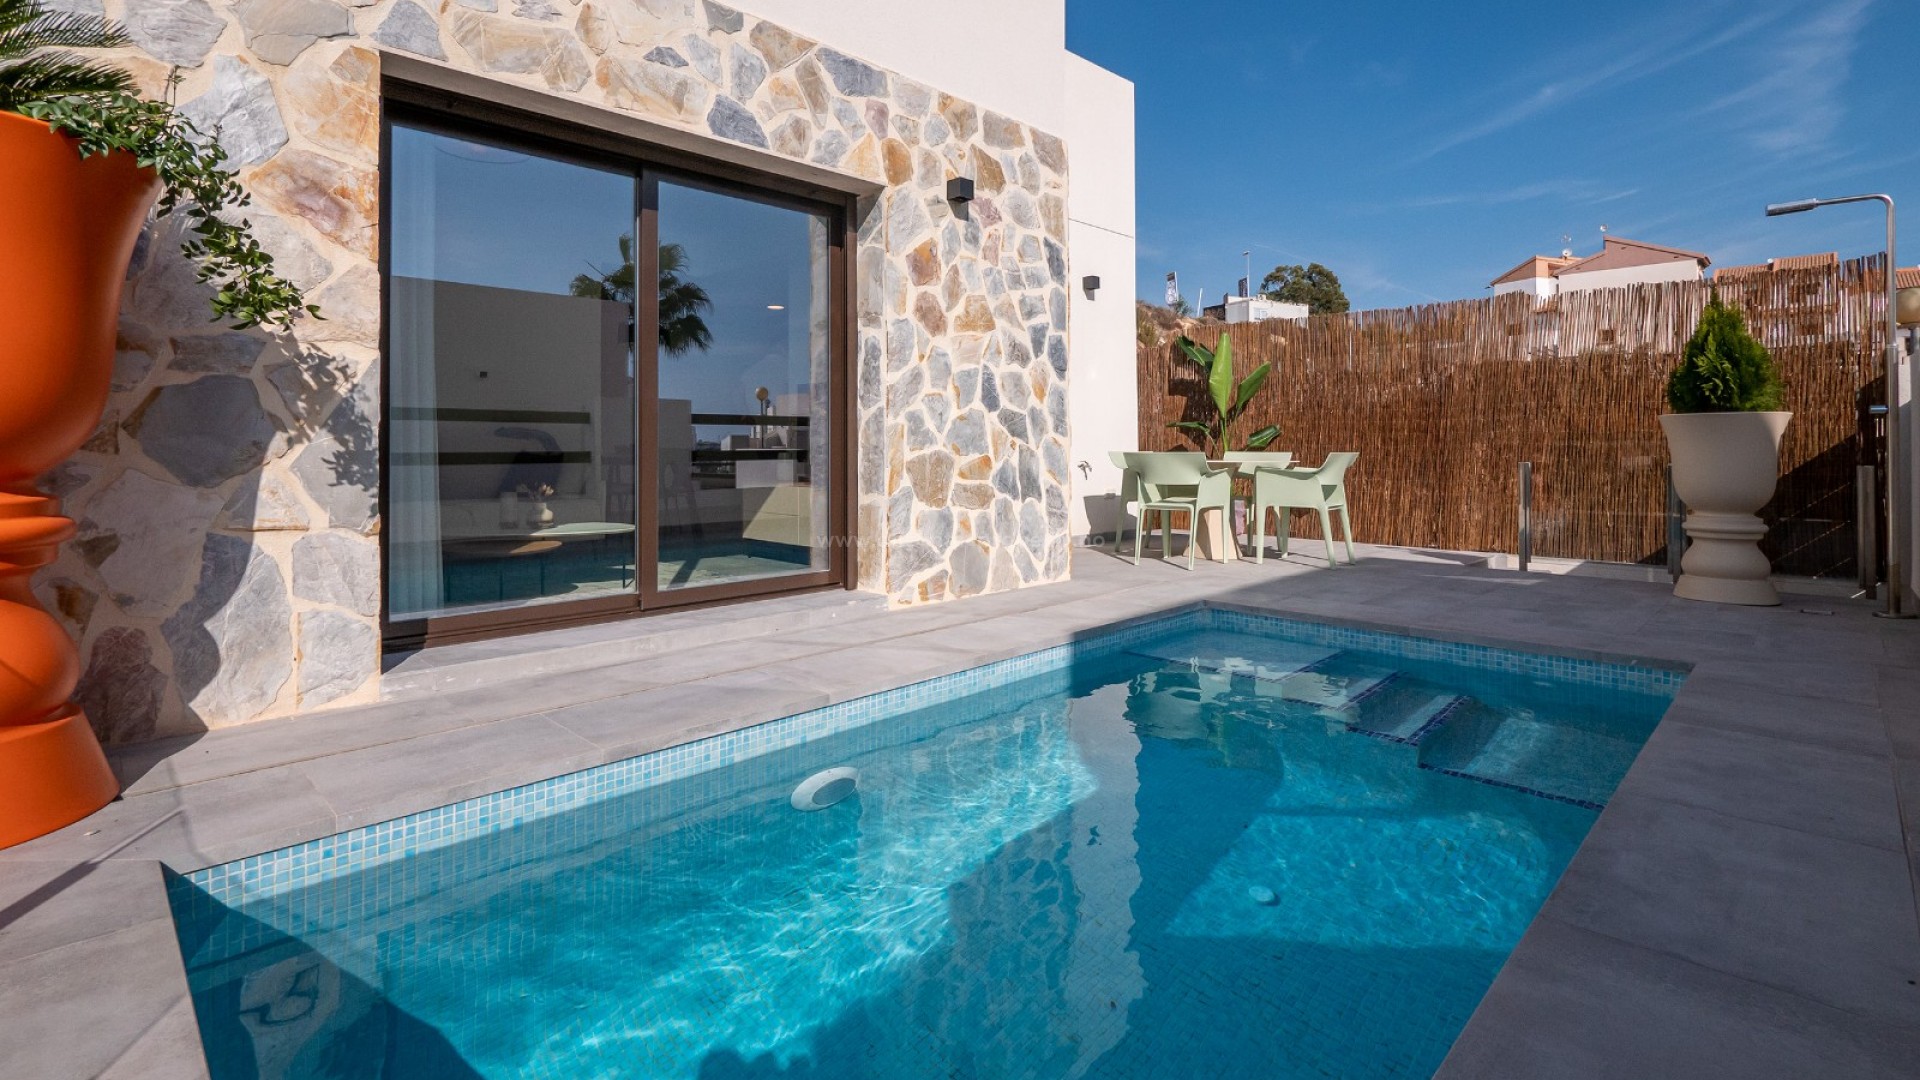 House/villa in Villamartin with 3 bedrooms and 2 bathrooms, private garden and pool. The homes are located by the golf course in Villamartin. 30 minutes from Alicante airport.